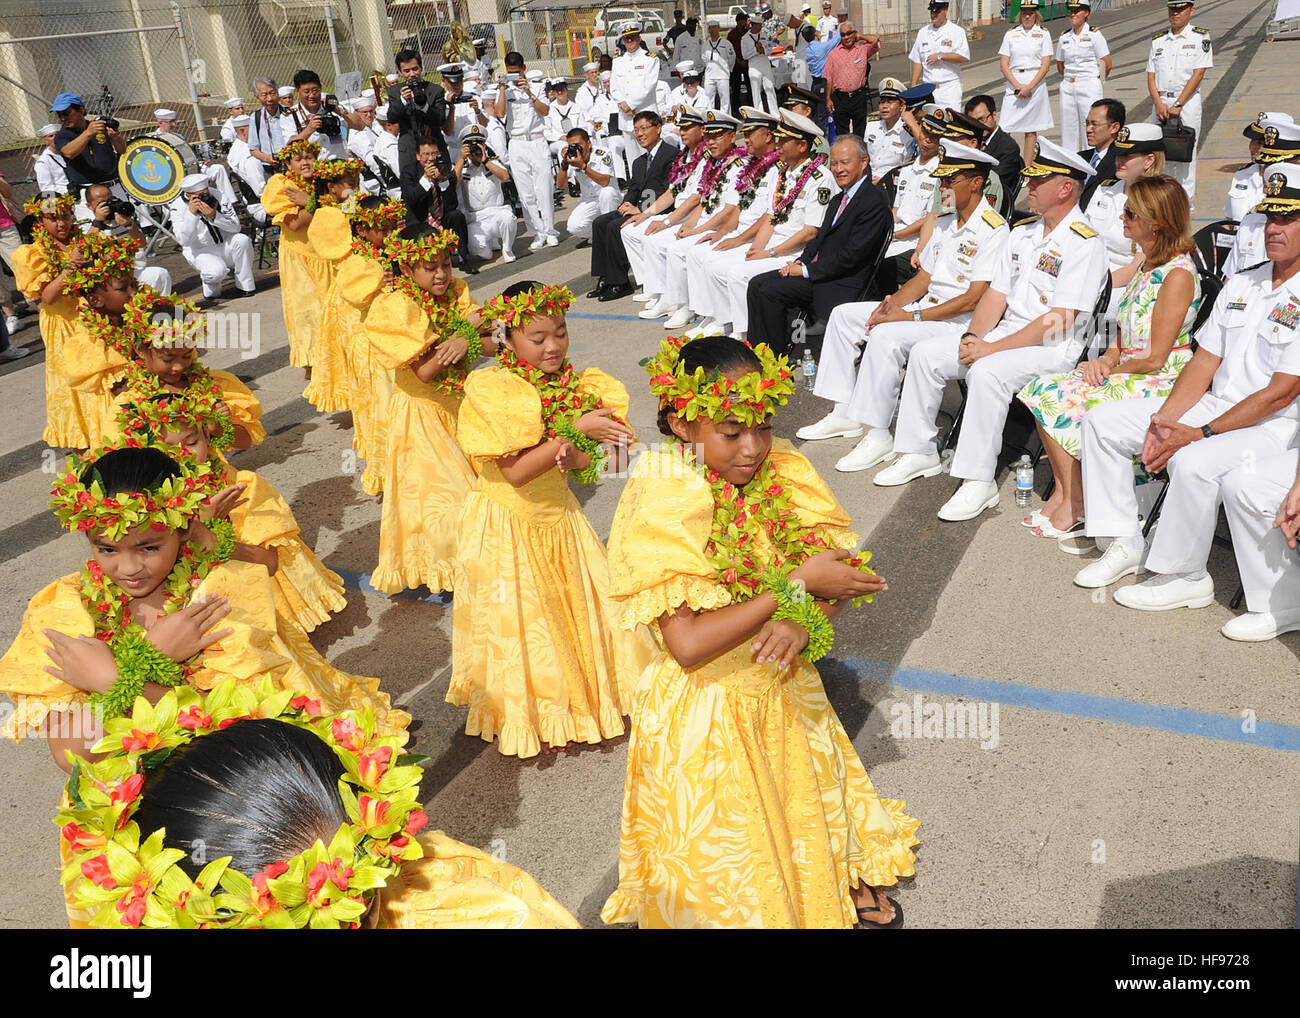 130906-N-ZK021-008 – PEARL HARBOR-HICKAM (Sept. 6, 2013) – U.S. and Chinese leaders watch as Keiki Hula dancers perform during an arrival ceremony for three People’s Liberation Army-Navy ships, Luhu-class destroyer Qingdao (DDG 113), Jiangkai-class frigate Linyi (FFG 547) and a Fuqing-class fleet oiler as they arrive in Hawaii for a scheduled port visit. Over the weekend, Chinese and U.S. leaders will conduct dialogues to build confidence and mutual understanding between the two nations. The port visit is part of the U.S. Navy’s ongoing effort to maximize opportunities for developing relations Stock Photo